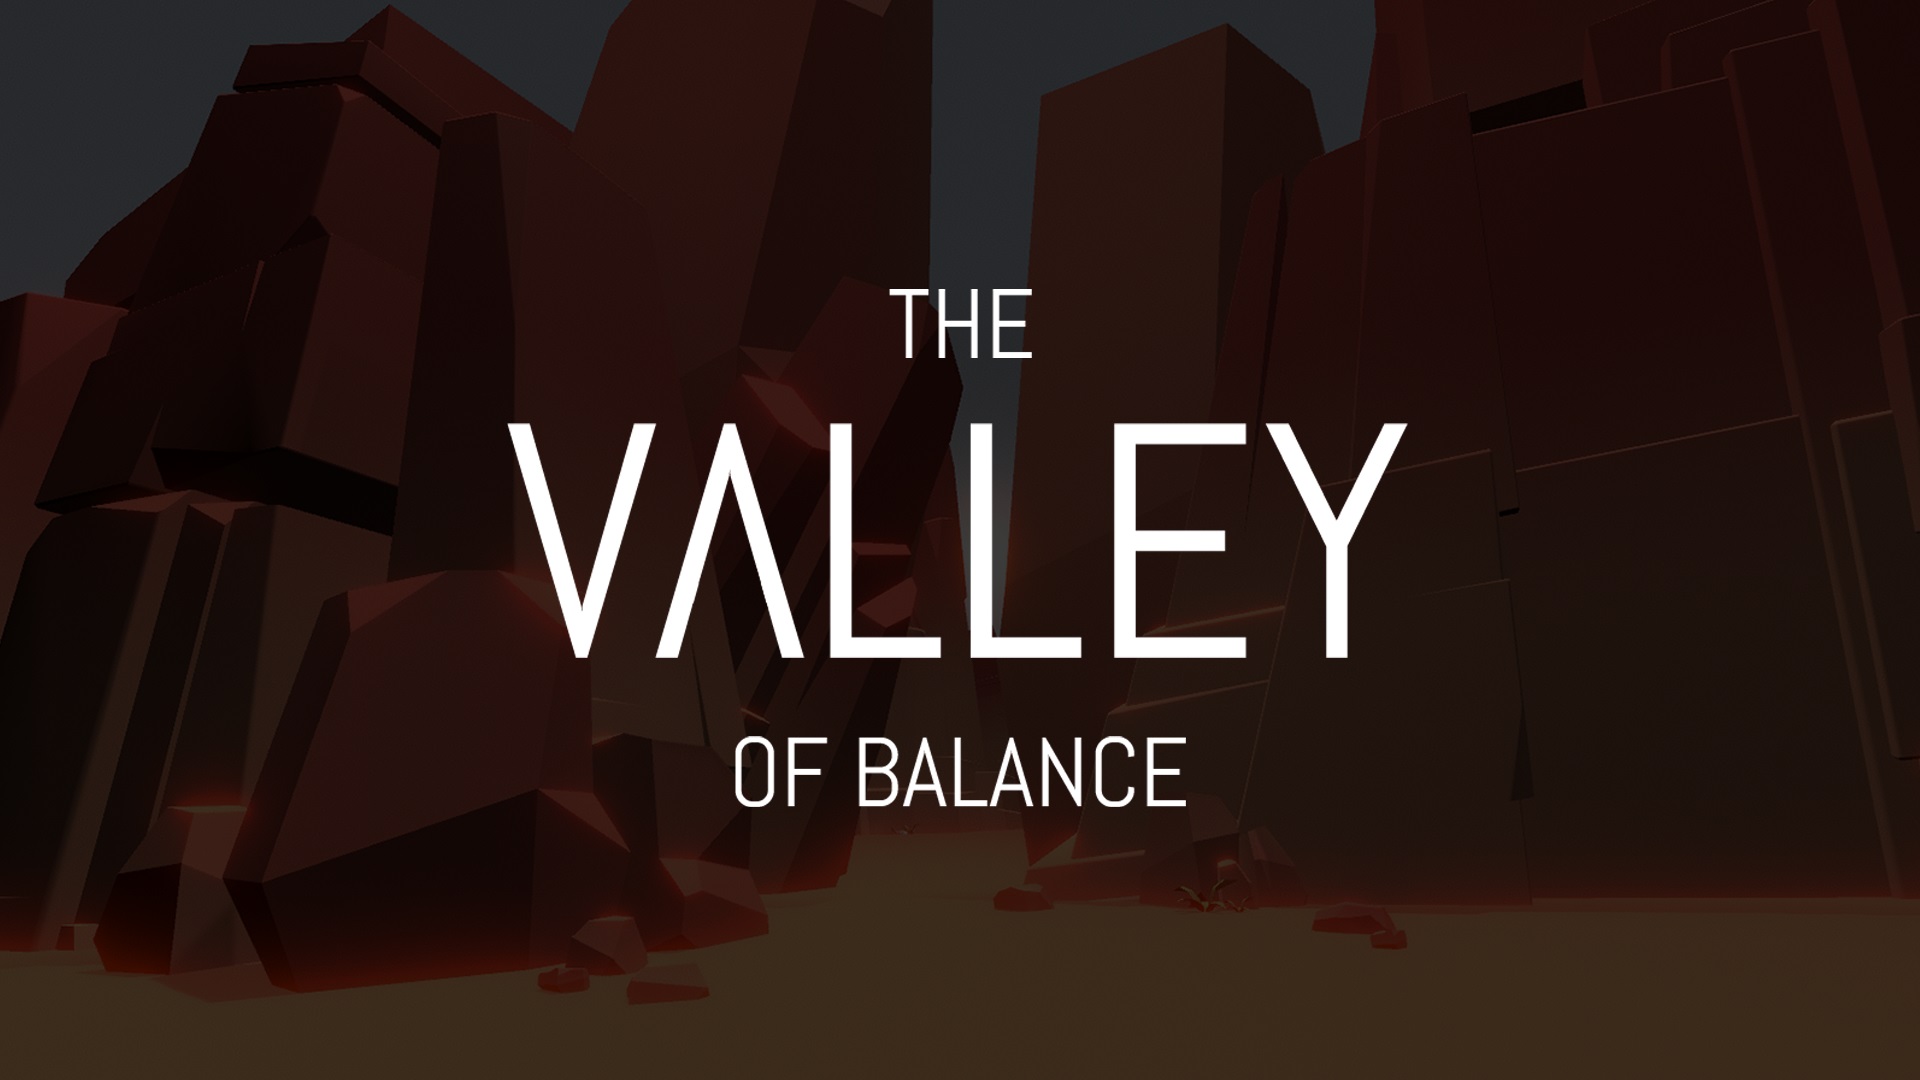 The Valley of Balance